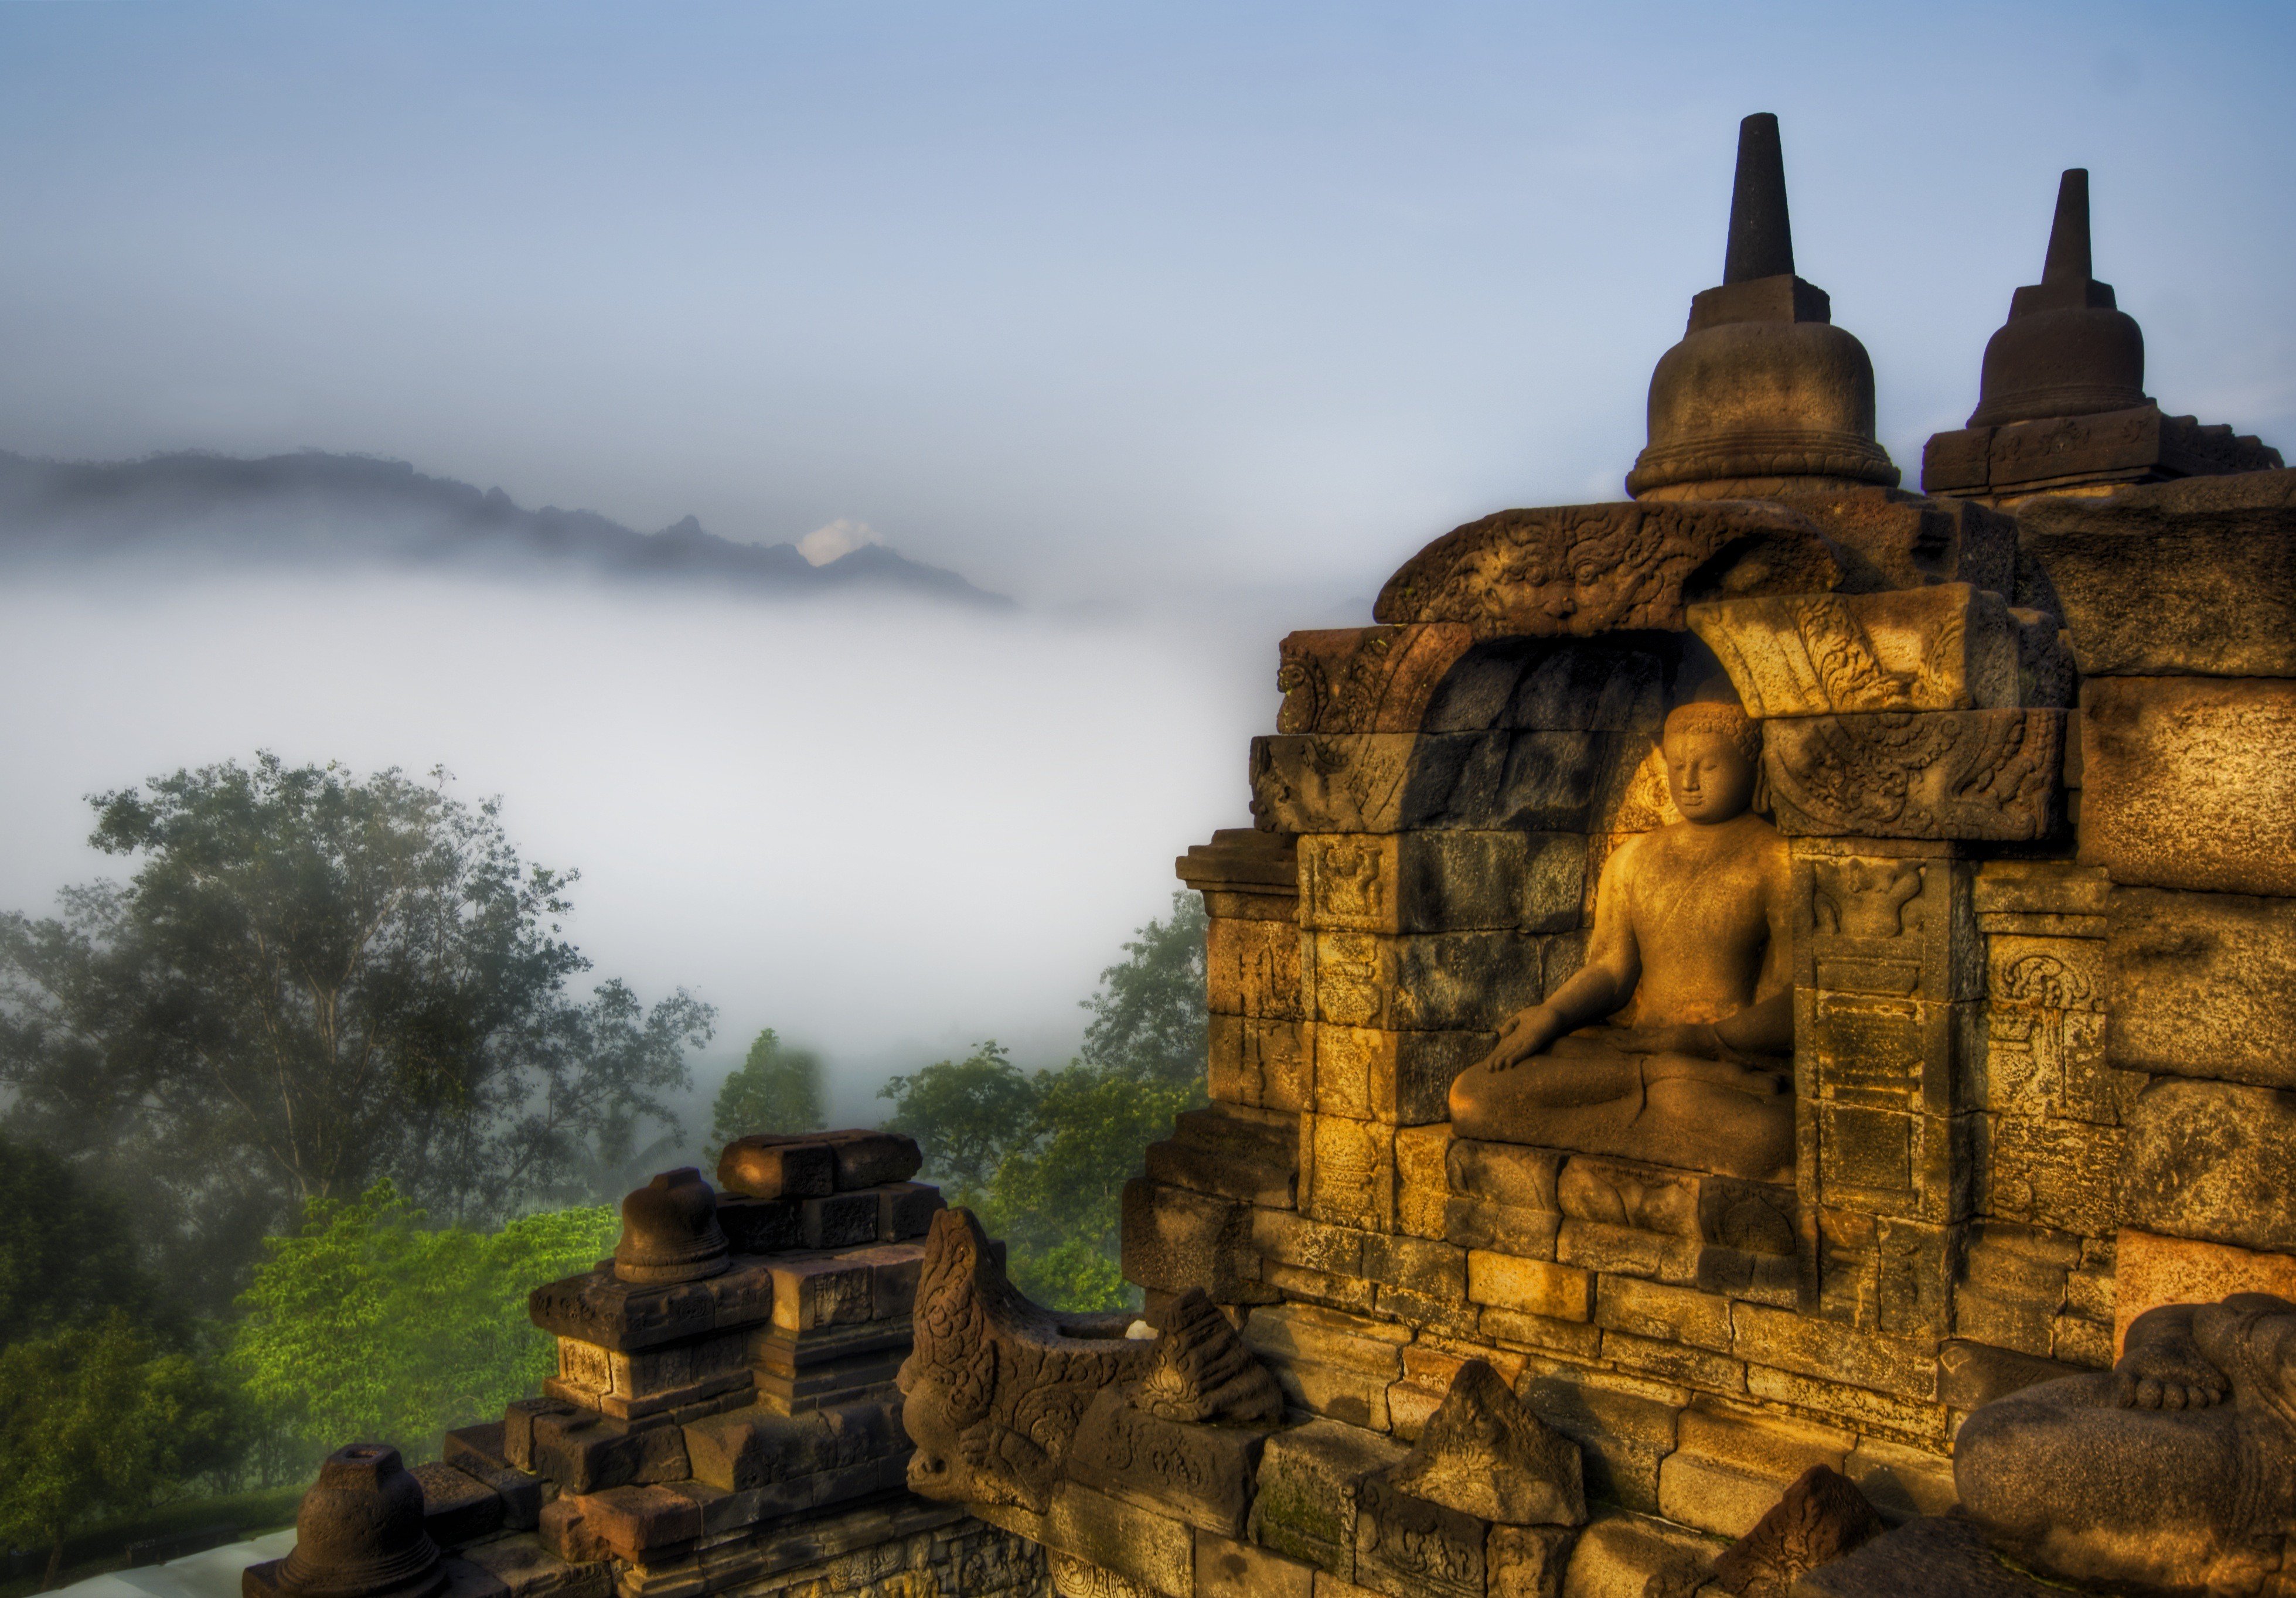 Buddha, Architecture, Religious, Temple, Indonesia, Buddhism, HDR, Trees, Mountains, Mist, Stones, Sculpture, Meditation, Calm Wallpaper